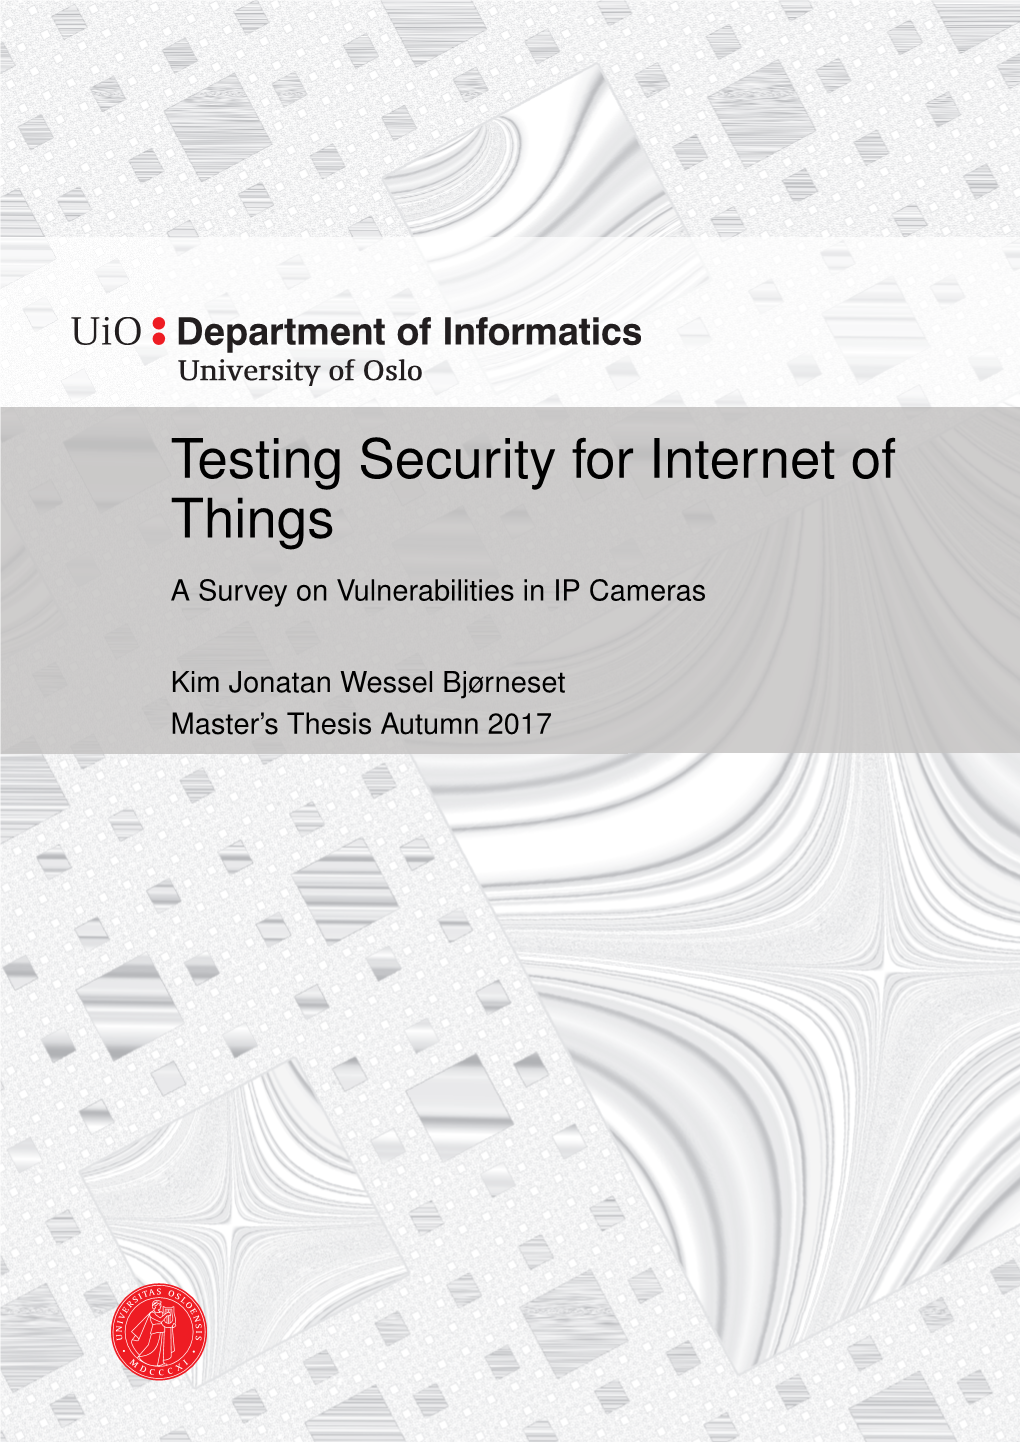 Testing Security for Internet of Things a Survey on Vulnerabilities in IP Cameras